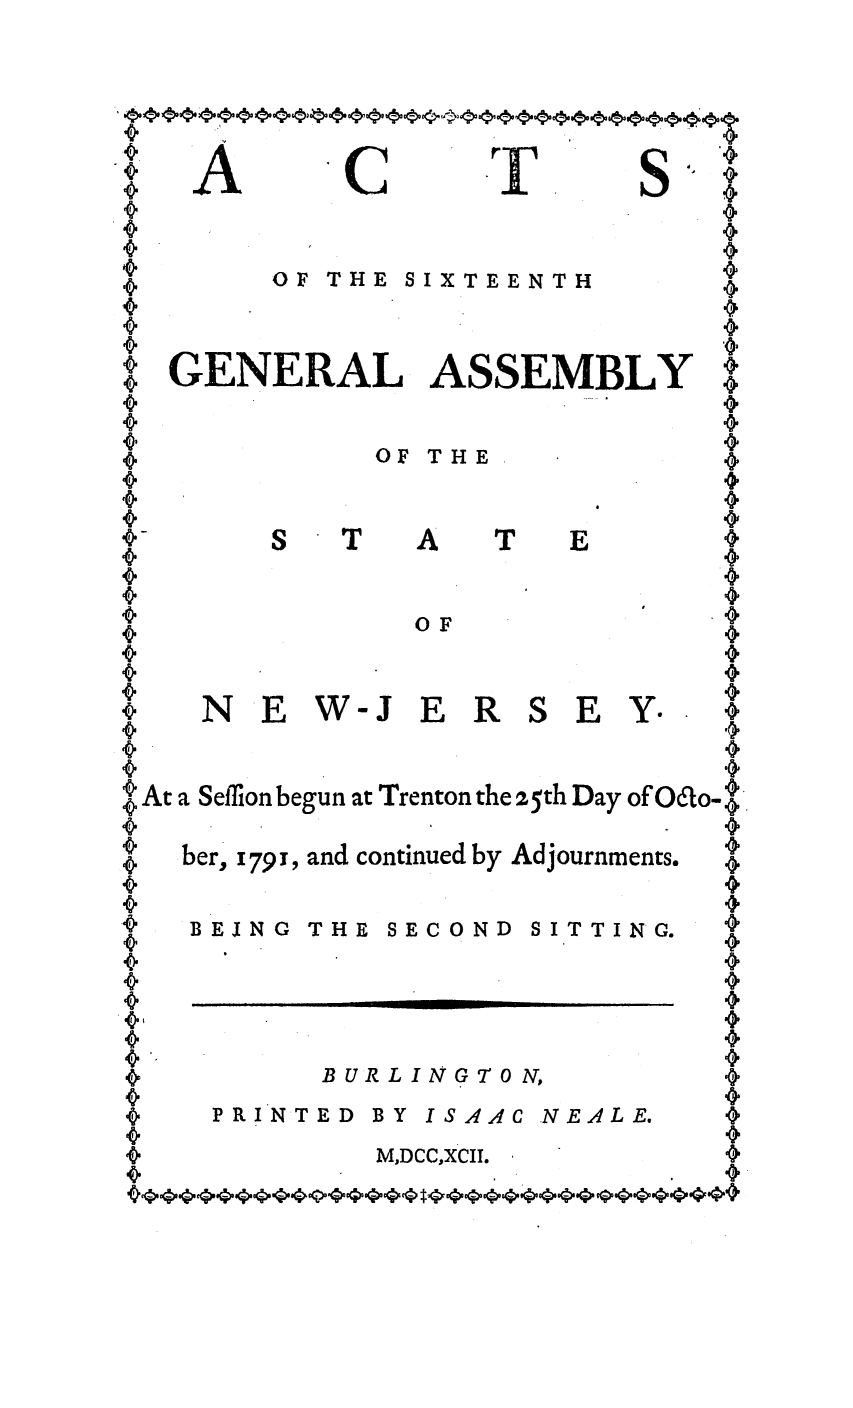 handle is hein.ssl/ssnj0254 and id is 1 raw text is: A C           .rS
0 F THE SIXTEENTH
SGENERAL ASSEMBLY
OF THE
S  T   A   T  E
OF
SN E W-J E R S E Y..
At a Sefflon begun at Trenton the z5th Day of O6o-
ber, x79 x, and continued by Adjournments.
BEING THE SECOND SITTING.
B UR L IN G T O No
PRINTED BY ISAAC NEALE.
M,DCCXCII.


